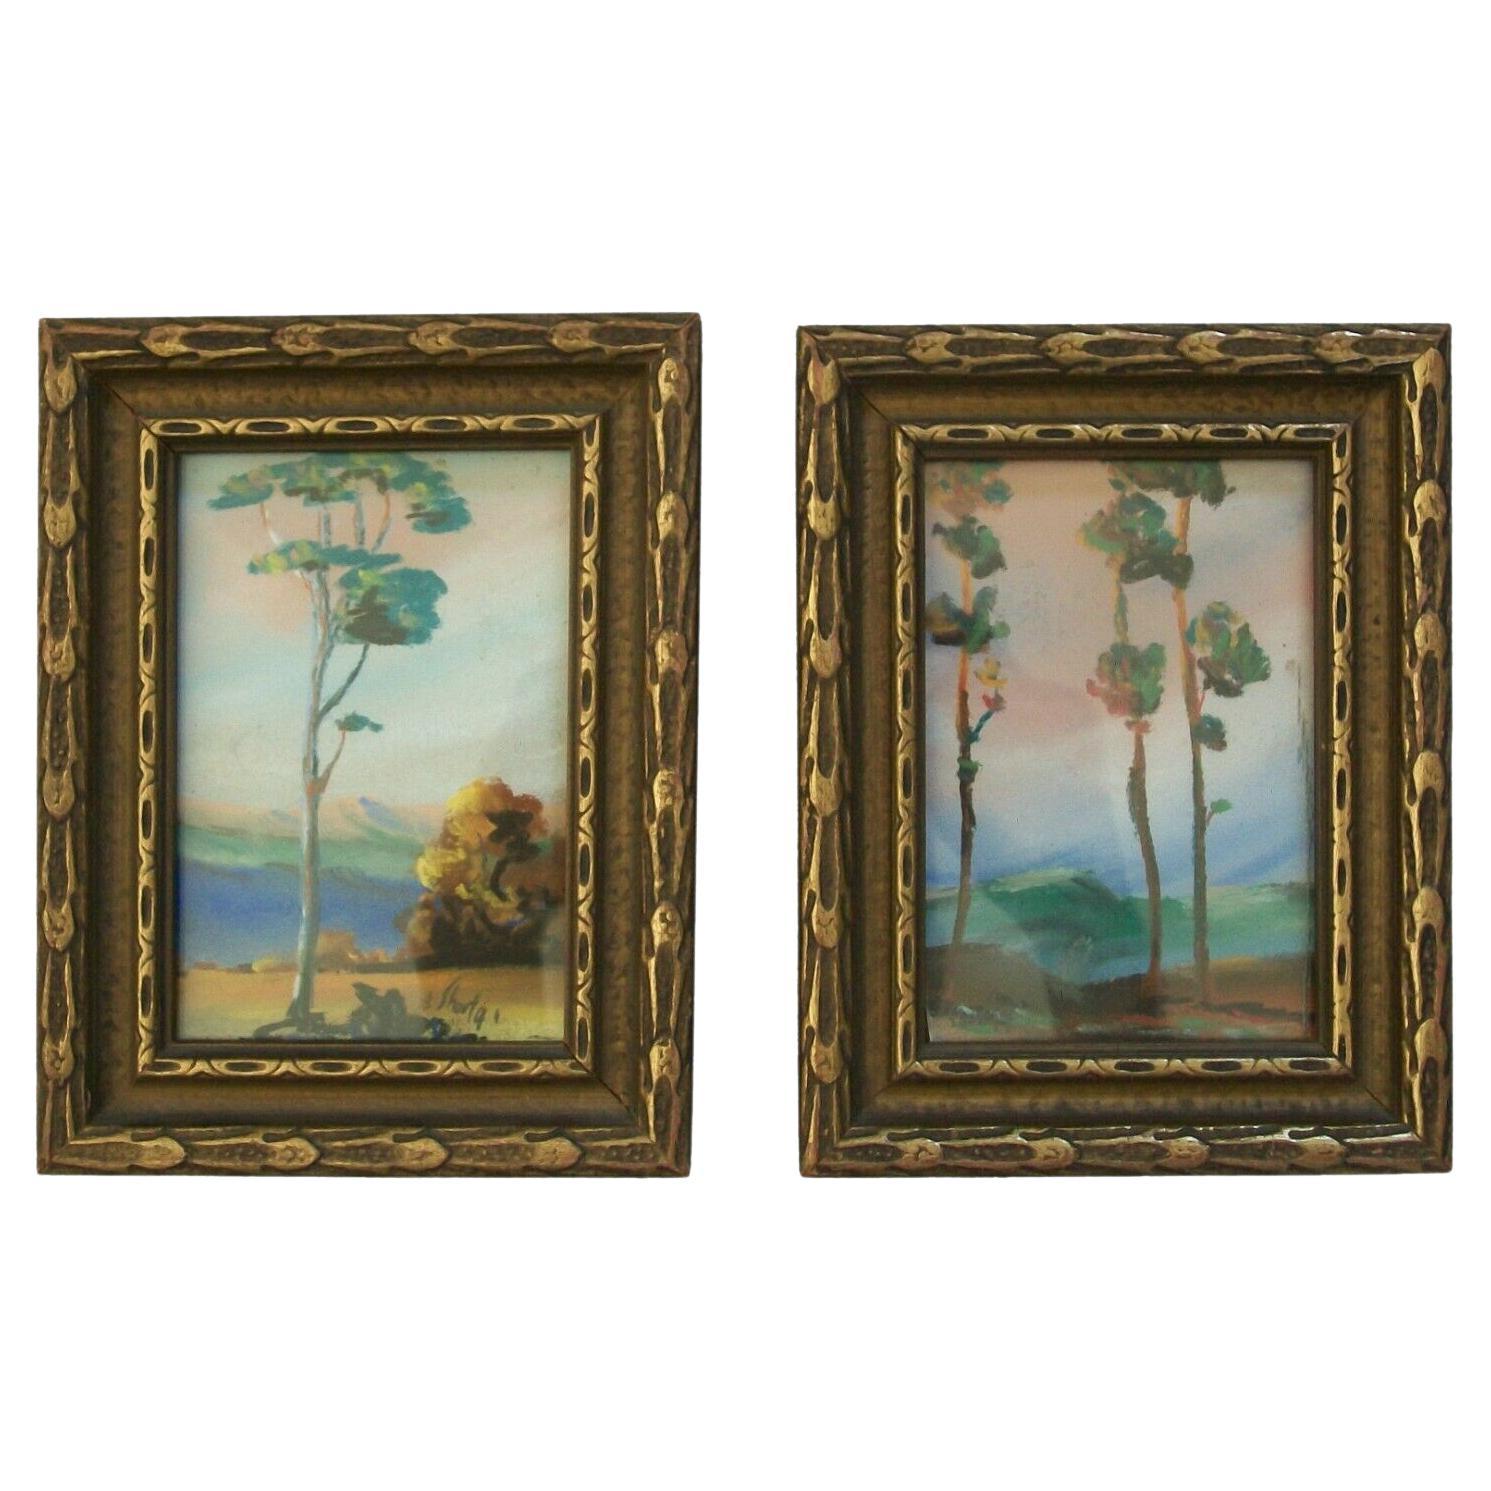 Miniature Pair of American Impressionist Framed Landscape Paintings, Circa 1900